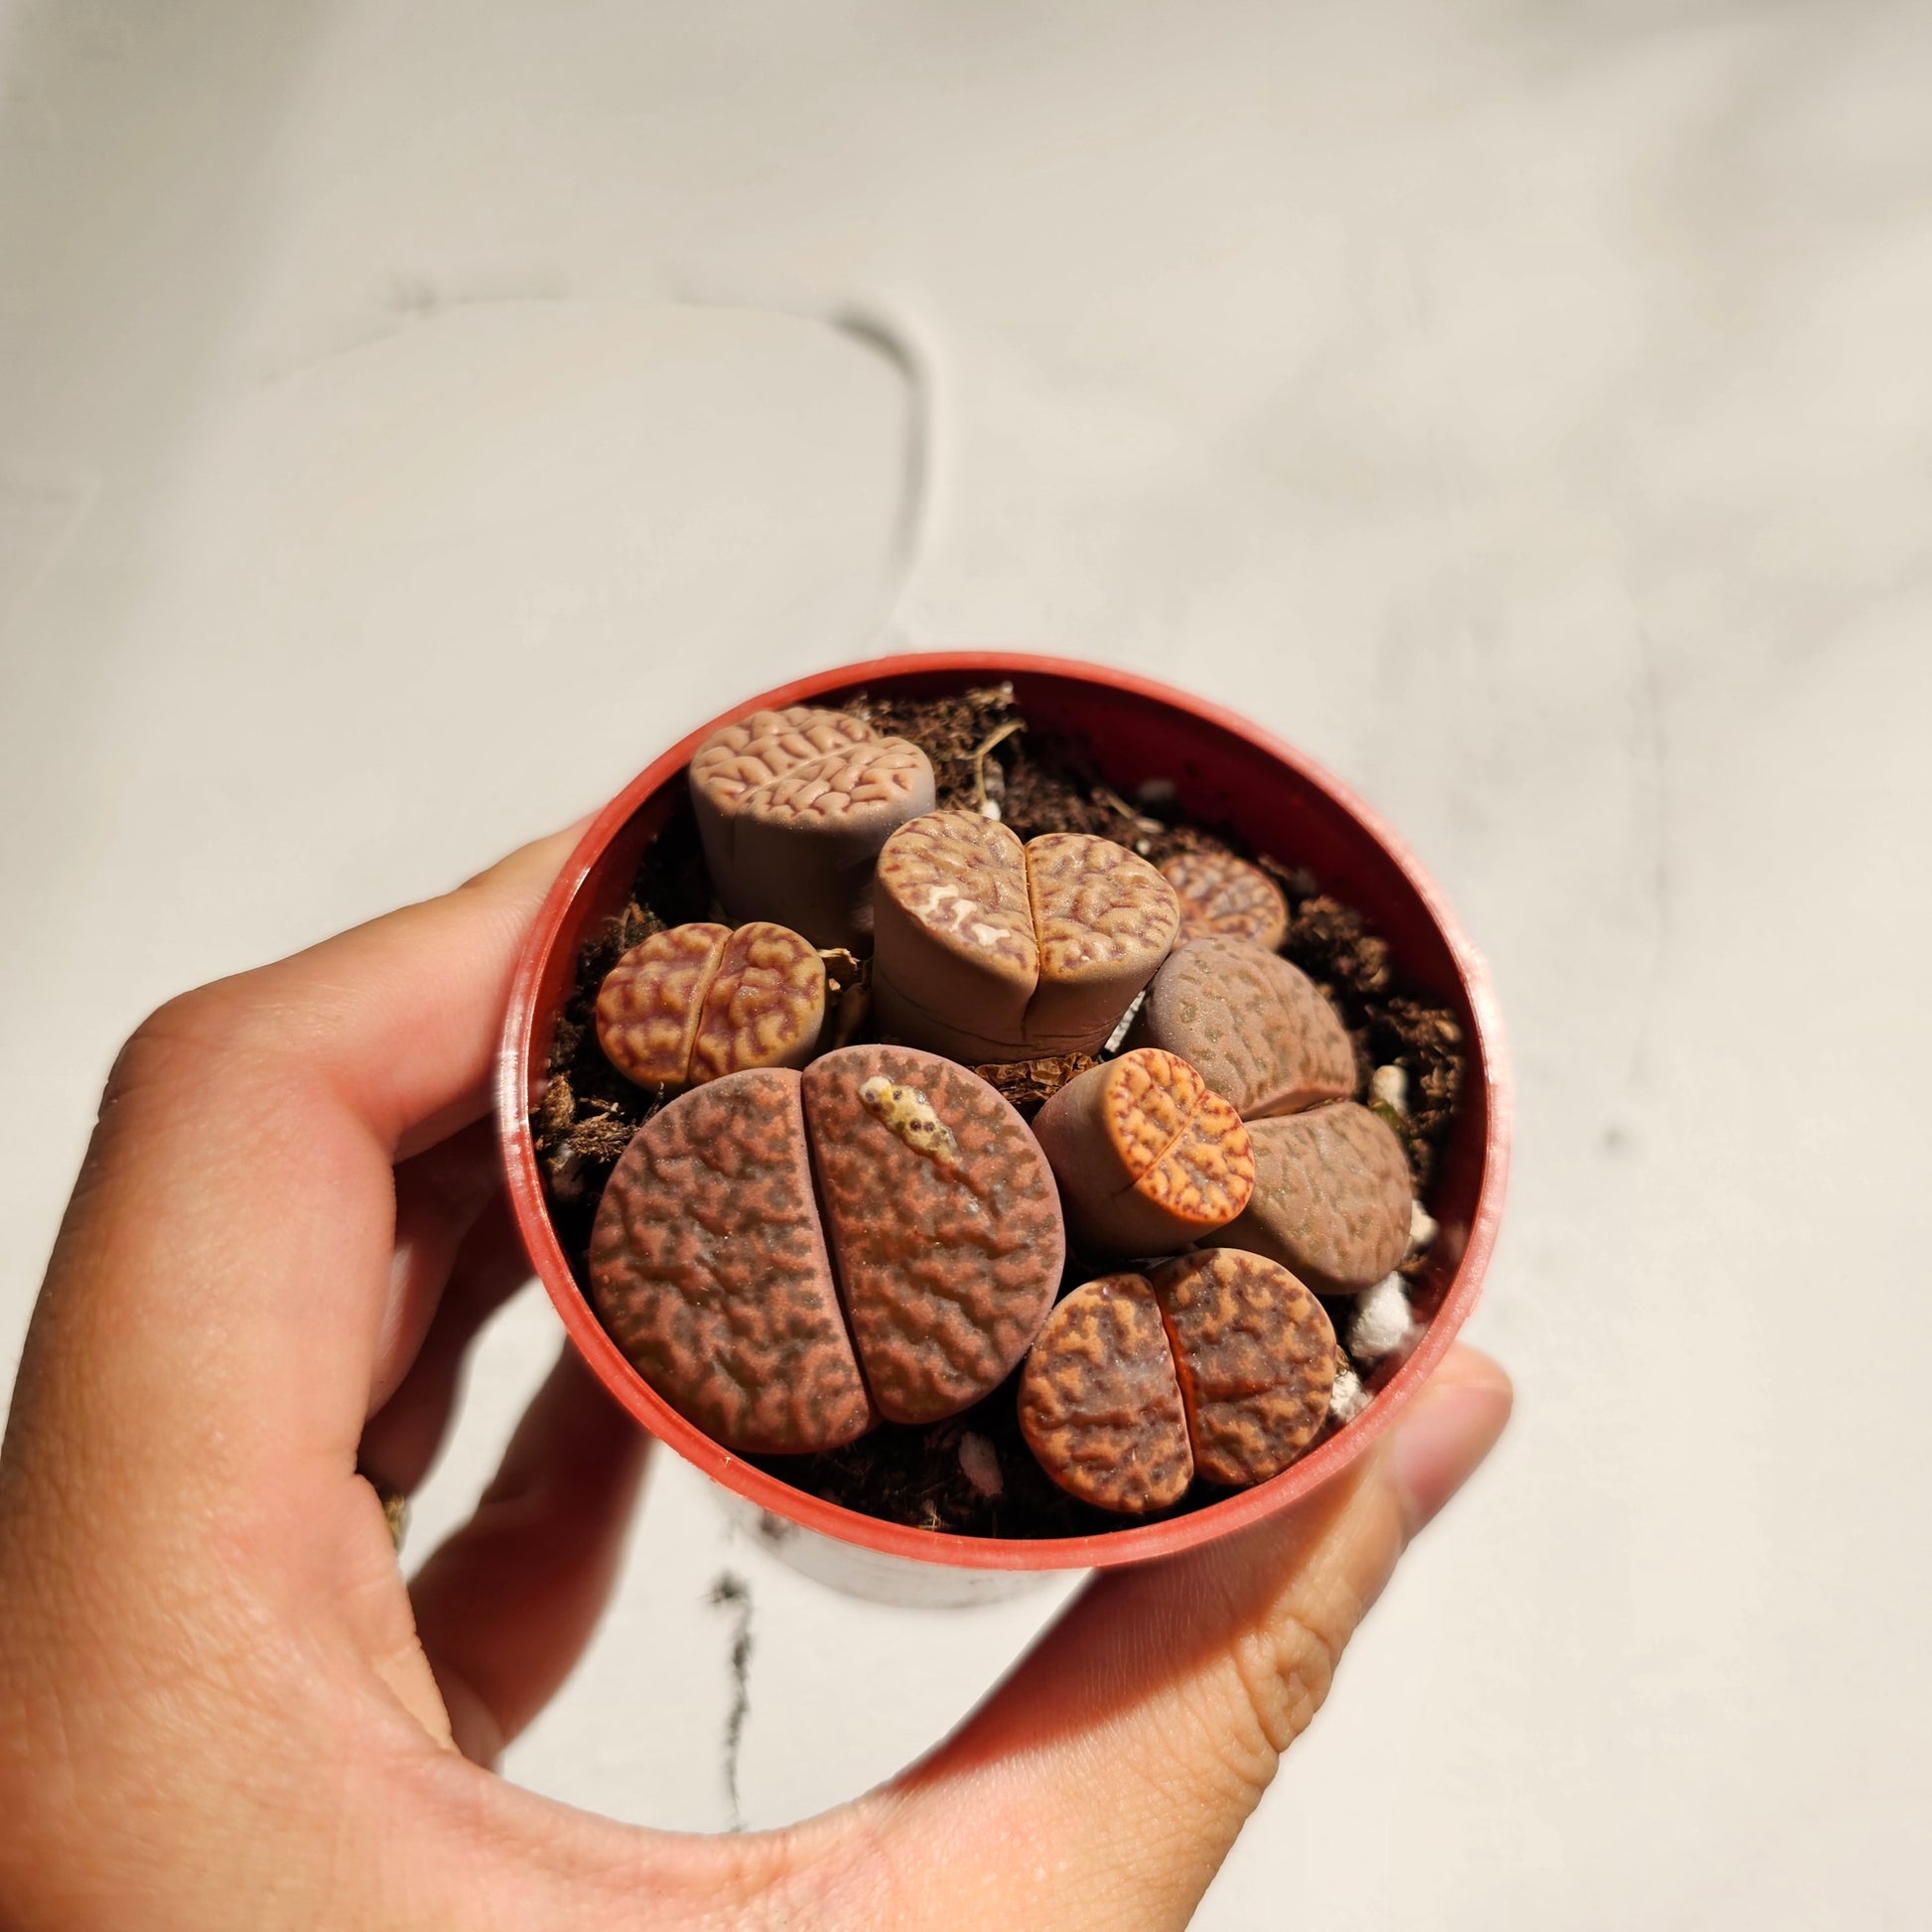 Living Stones (Lithops) in a 2 inch pot. Indoor plant for sale by Promise Supply for delivery and pickup in Toronto